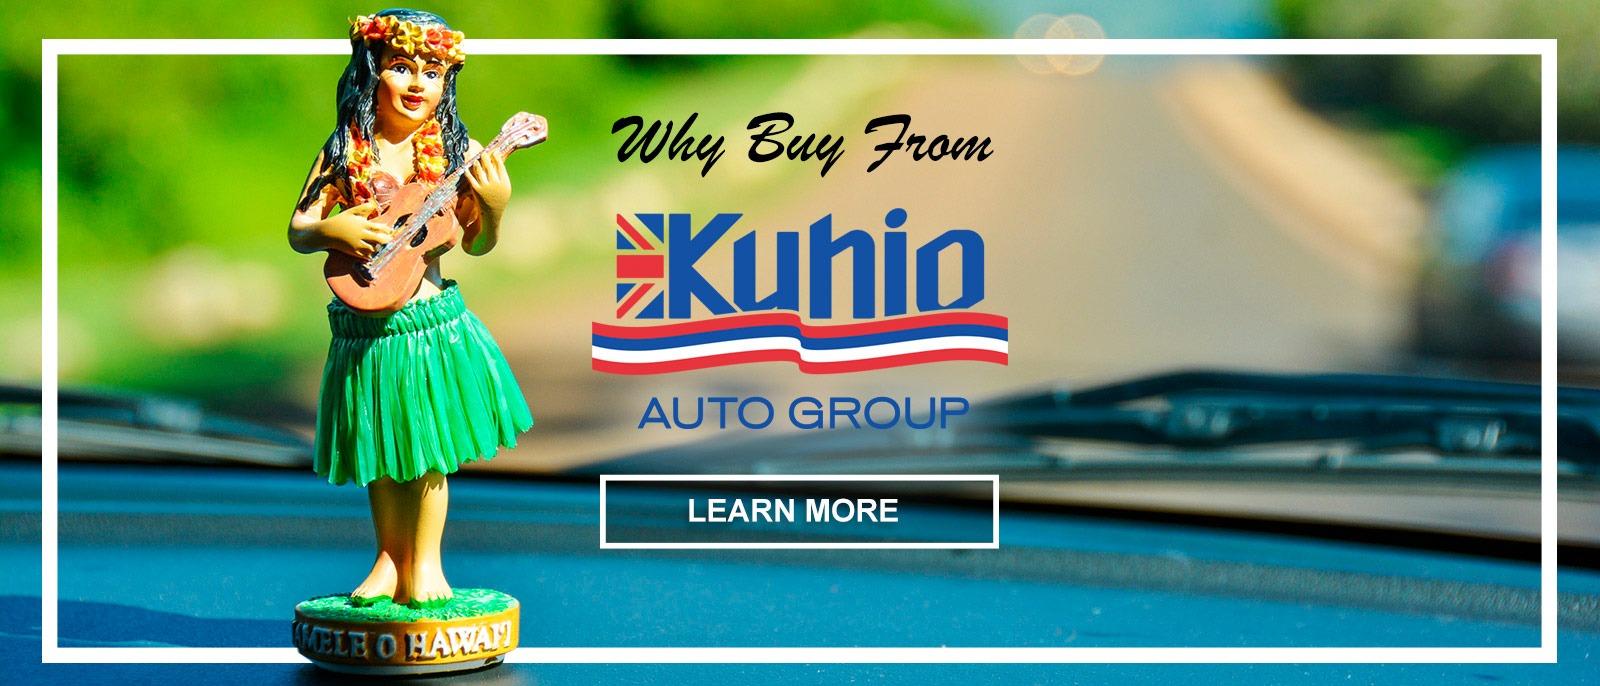 Why Buy from Kuhio Chevy